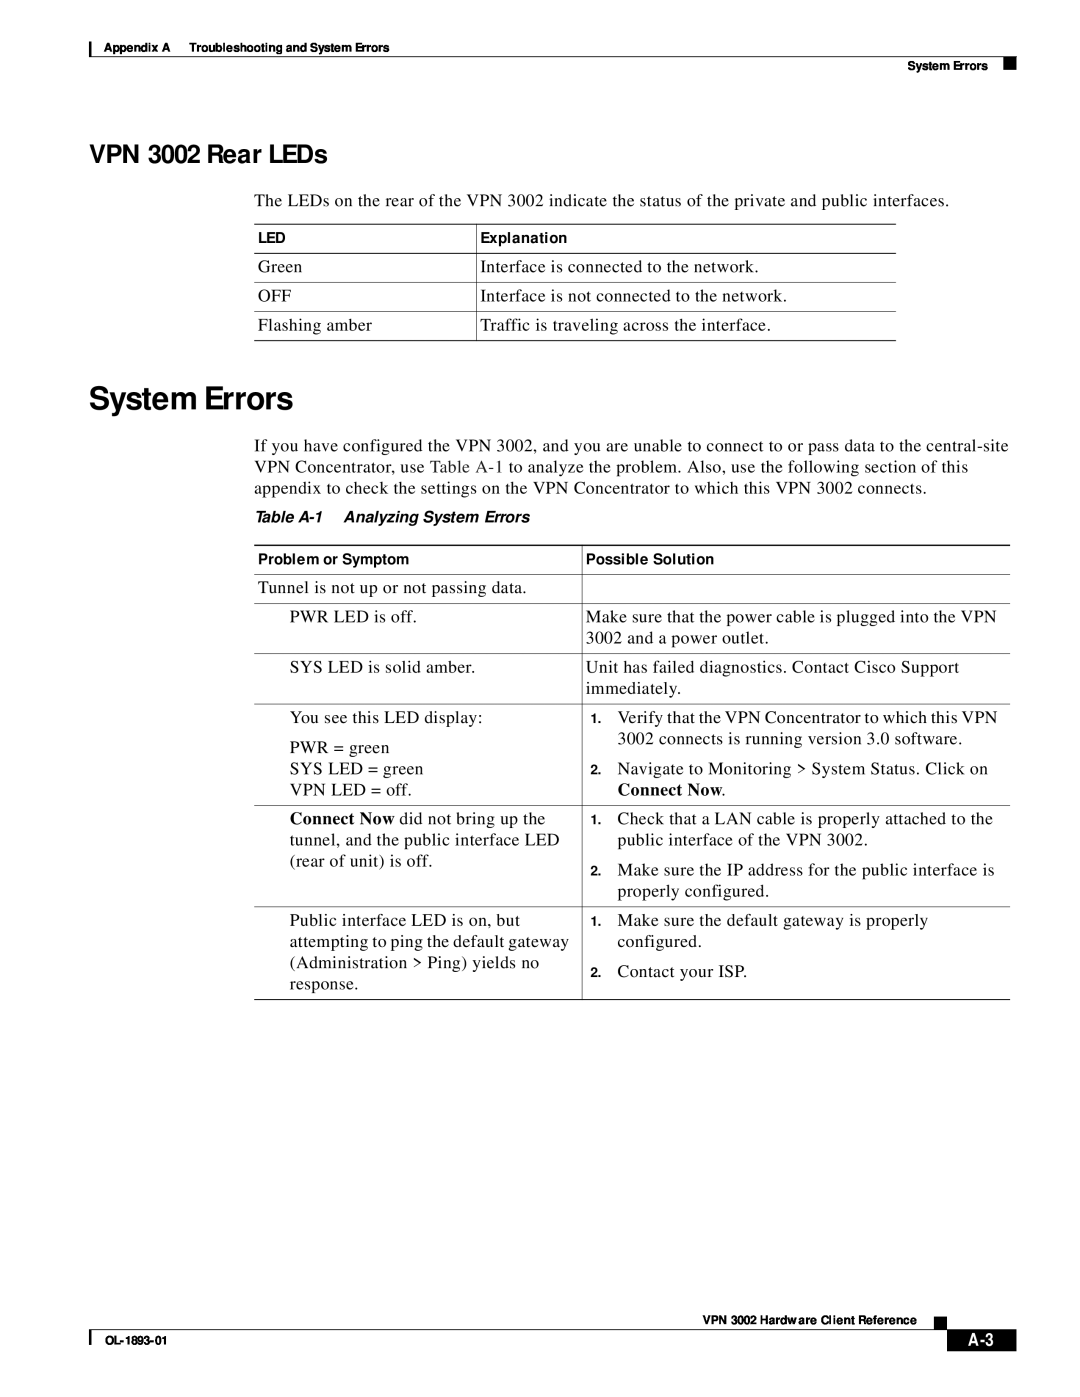 Cisco Systems manual System Errors, VPN 3002 Rear LEDs, Problem or Symptom, Possible Solution, Connect Now, Explanation 